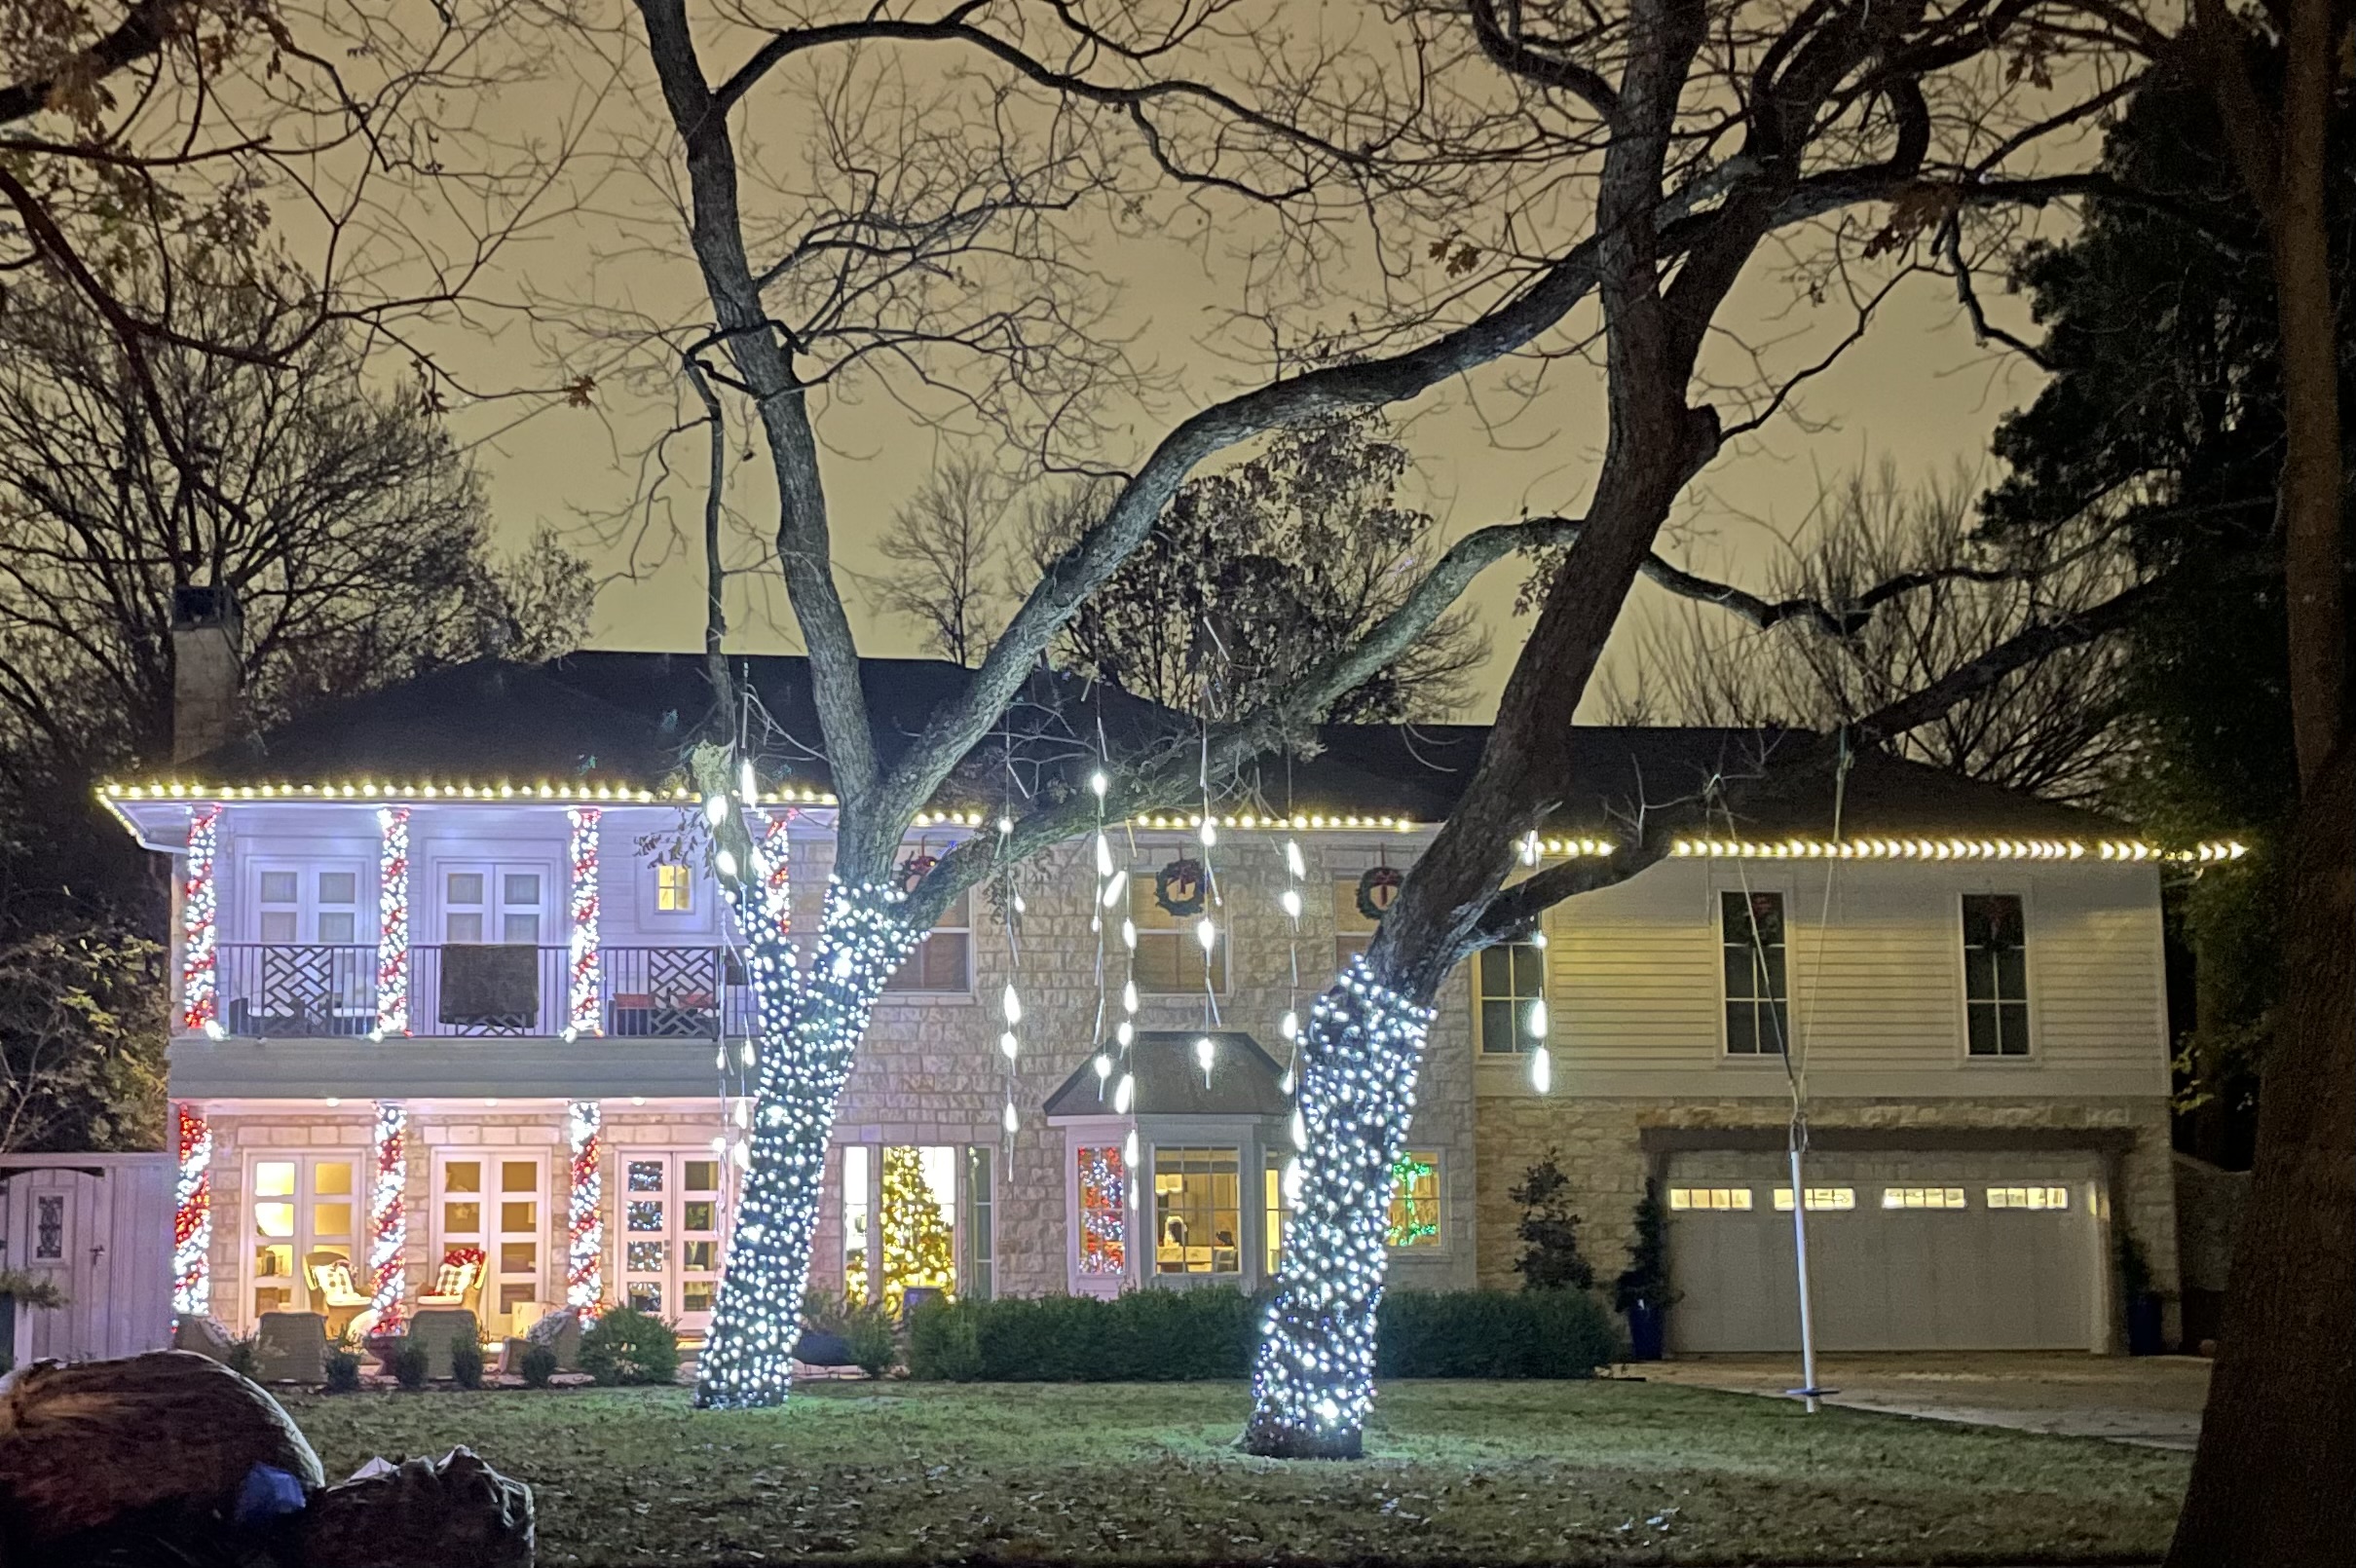 Lights on the house and hanging from trees in Forest Hills.